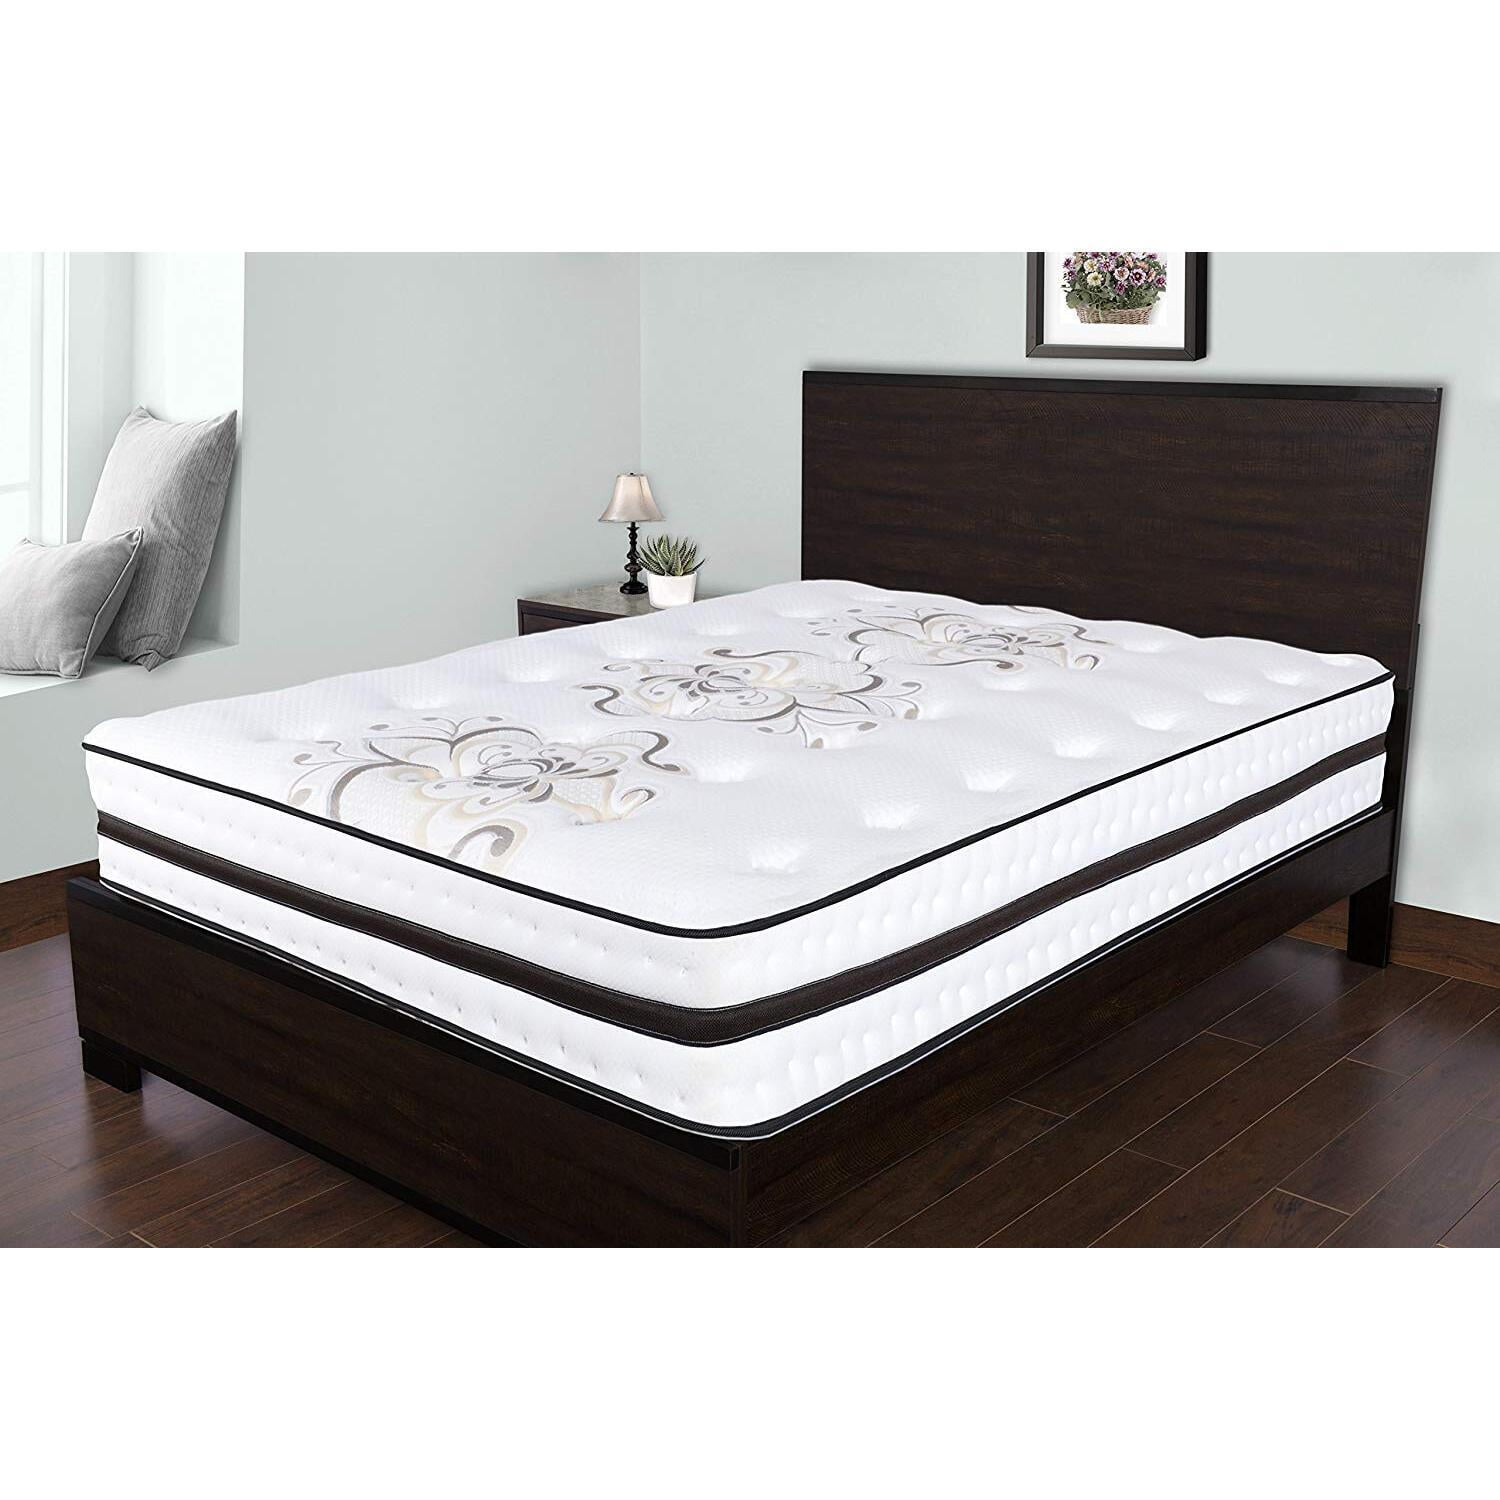 Details about   Memory Foam Mattress Comfort Polyester Quilted Navy Sleep 6 Inch Multiple Size 